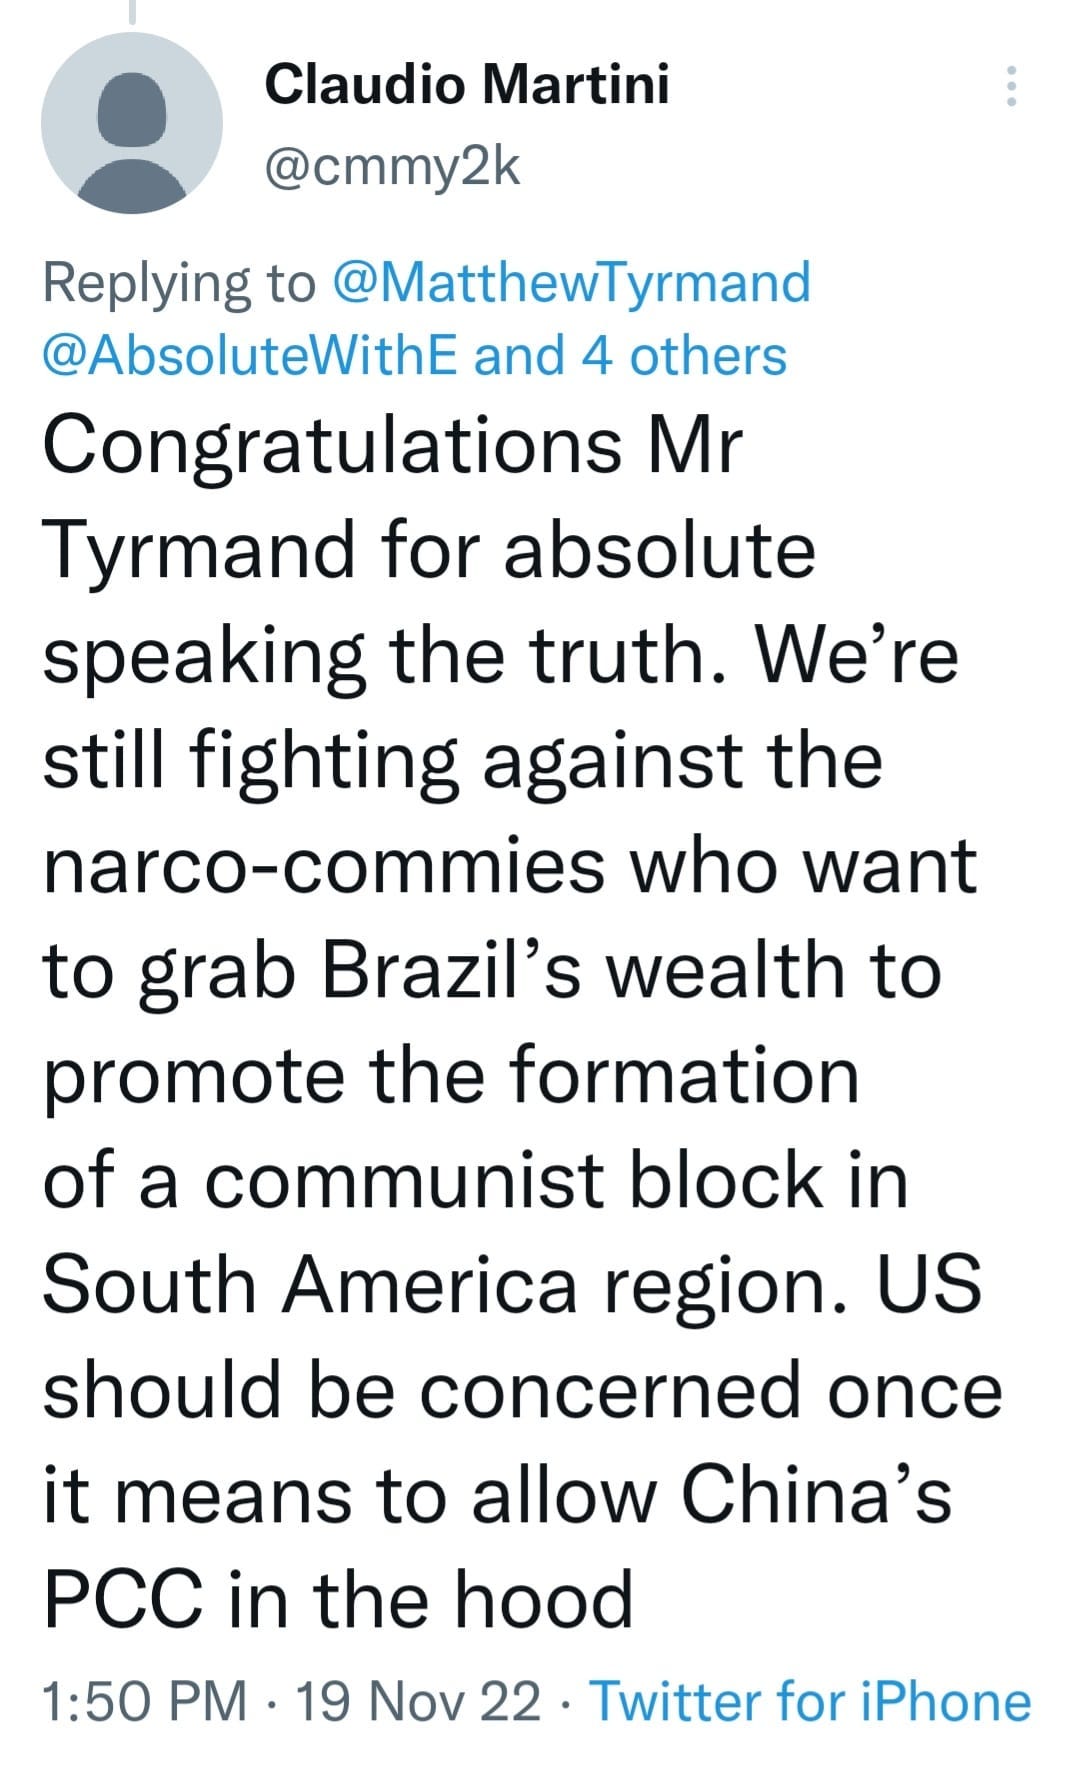 May be an image of text that says 'Claudio Martini @cmmy2k Replying to @MatthewTyrmand @AbsoluteWithE and 4 others Congratulations Mr Tyrmand for absolute speaking the truth. We're still fighting against the narco-commies who want to grab Brazil's wealth to promote the formation of a communist block in South America region. US should be concerned once it means to allow China's PCC in the hood 1:50 PM 19 Nov 22 Twitter for iPhone'